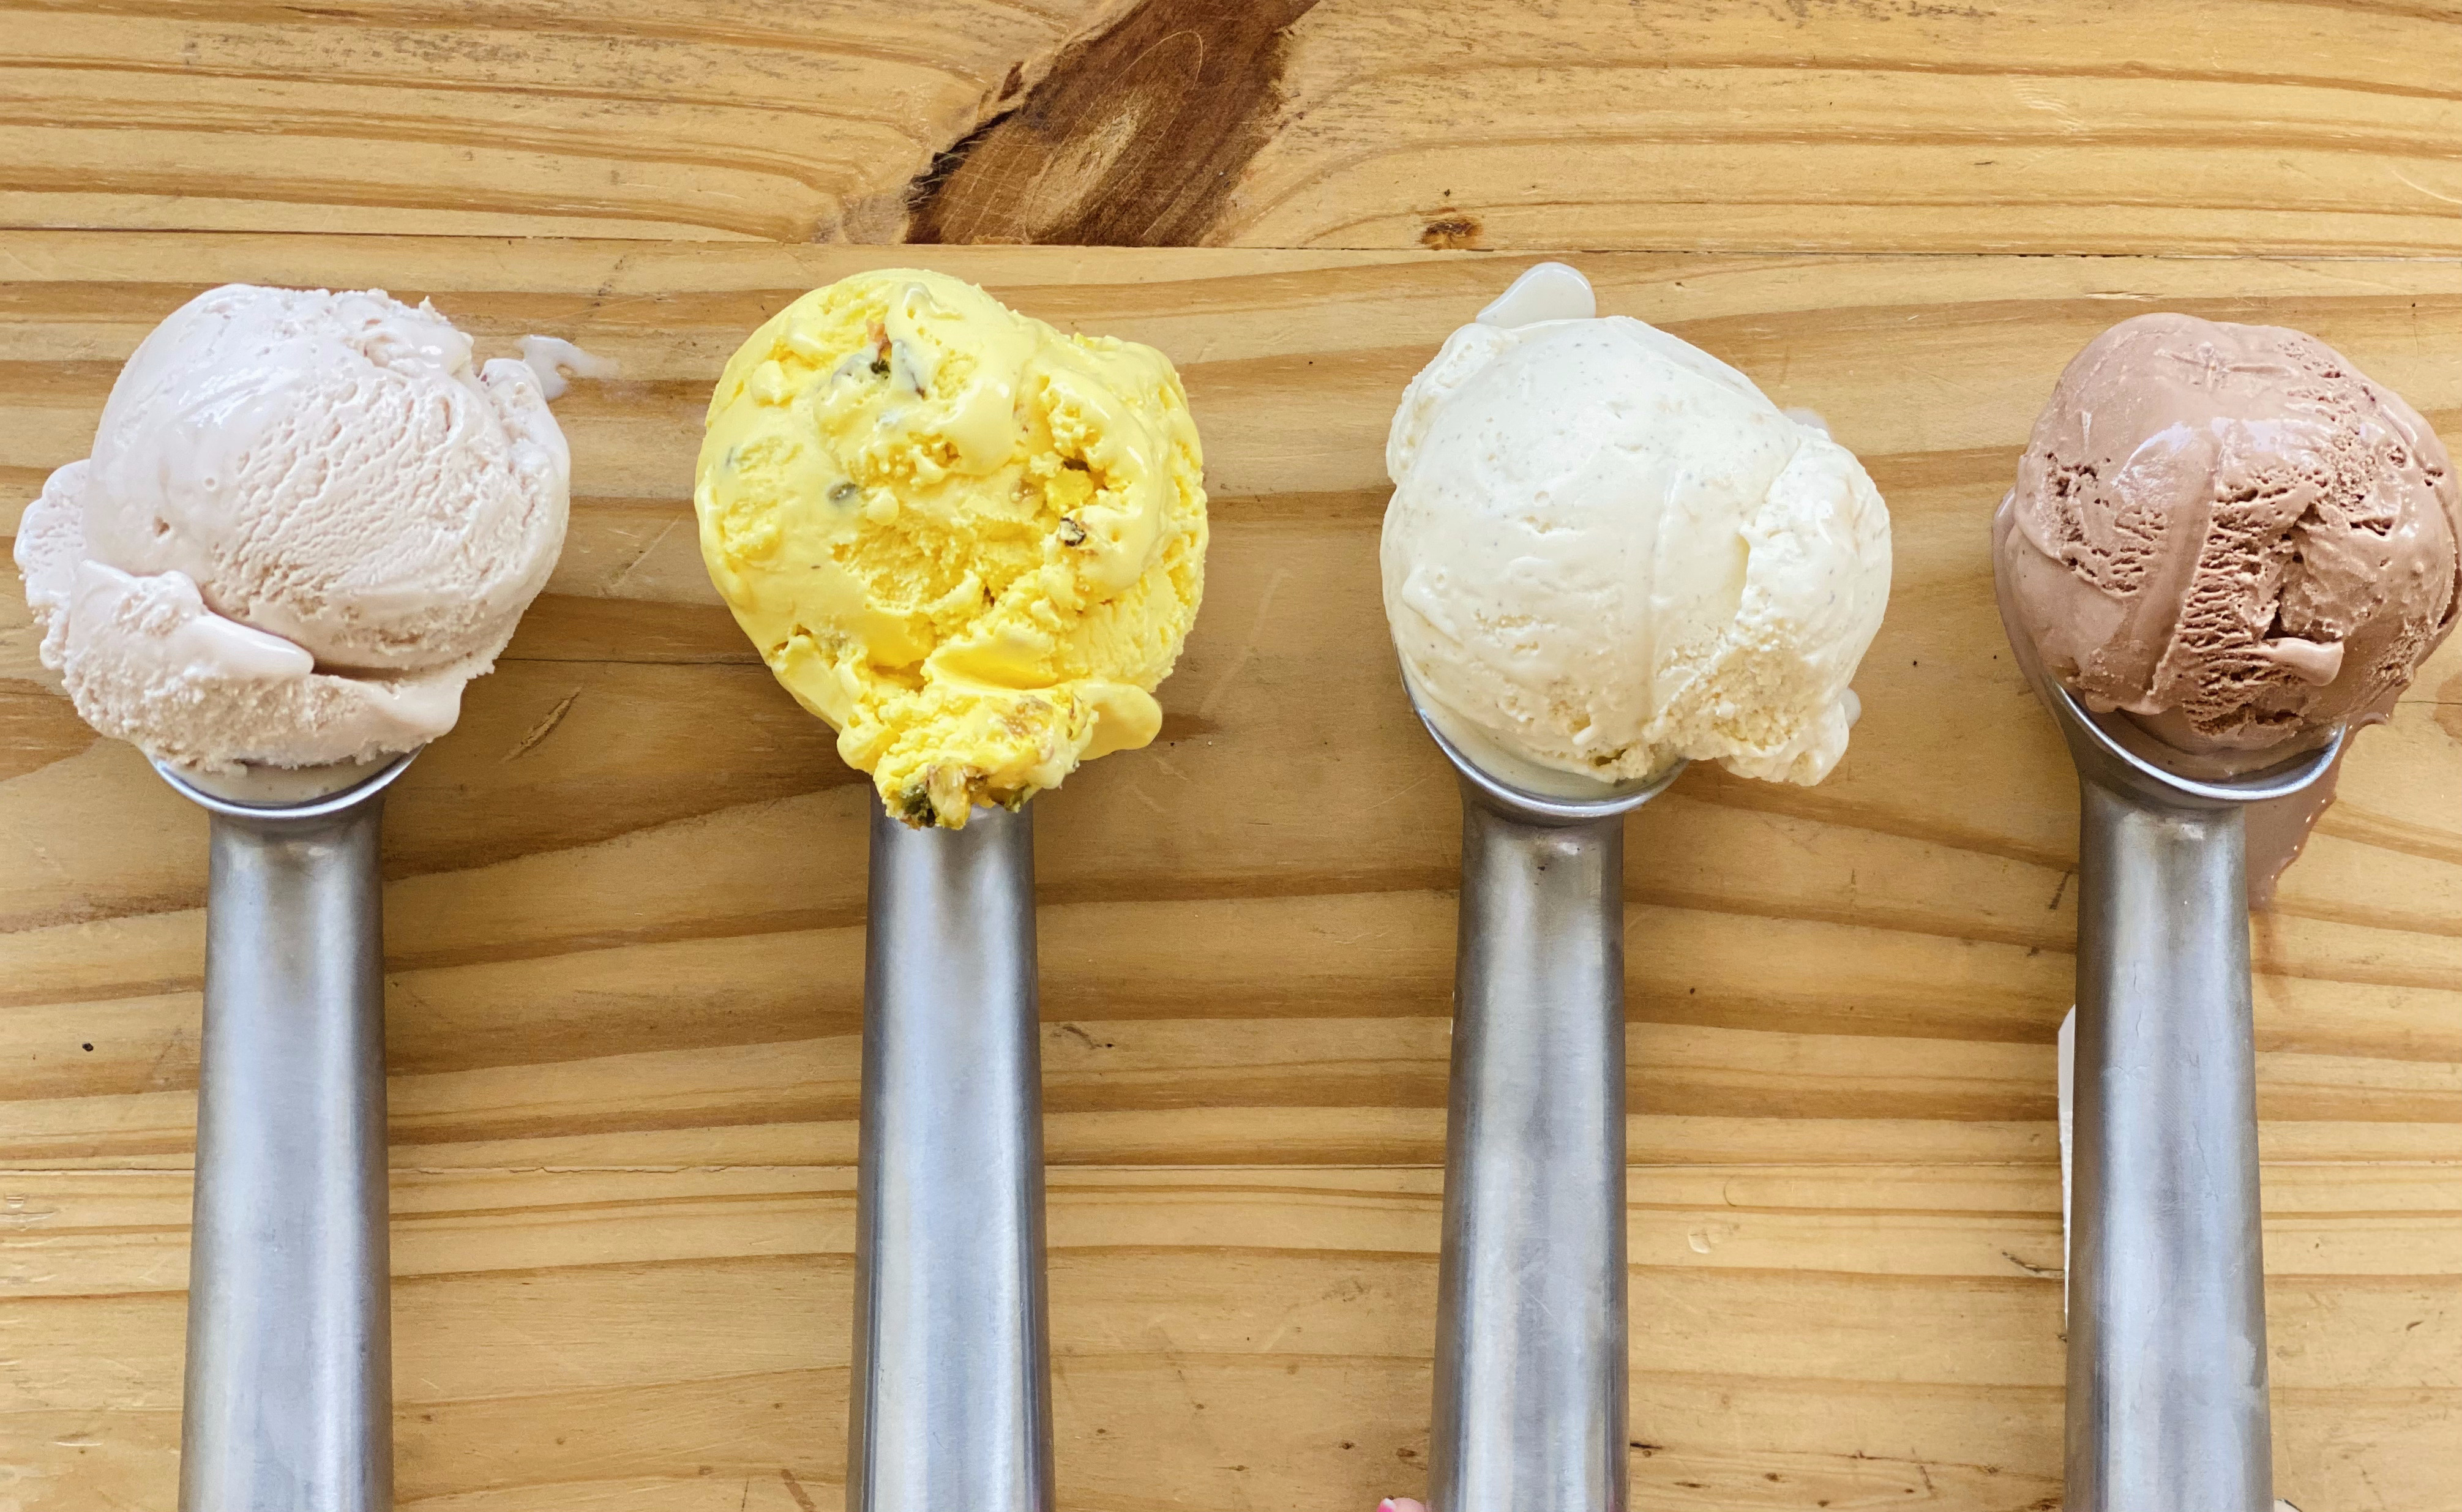 Four scoops of Craft Creamery ice cream, including brisket, Bastani, pho, and chocolate.